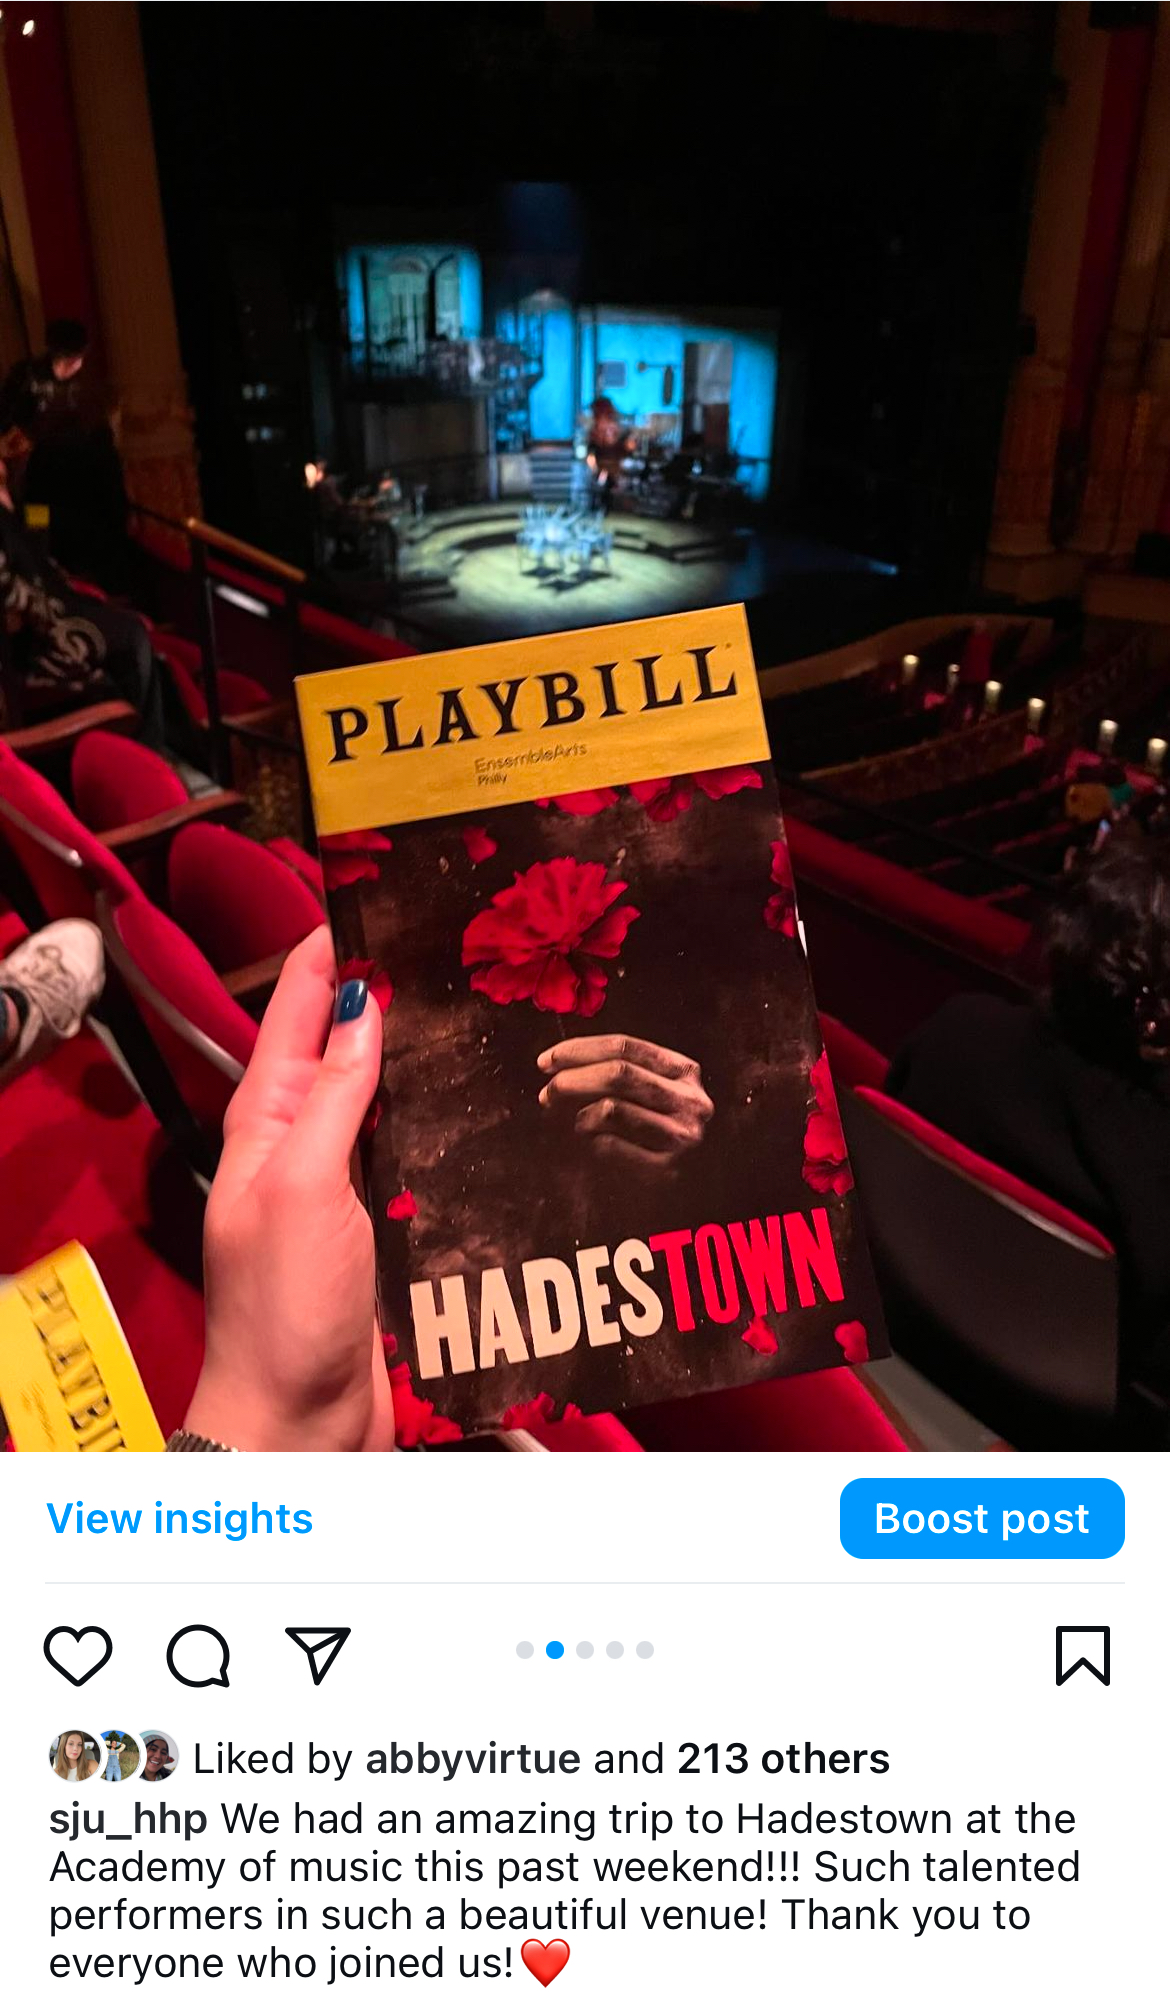 This image is a recap post from a trip to see Hadestown the musical in Philly. The center of the image has a hand holding the playbill for the musical which has a red flower in the center with the title of the show above. Behind the playbill is the audience below, and the stage behind it.